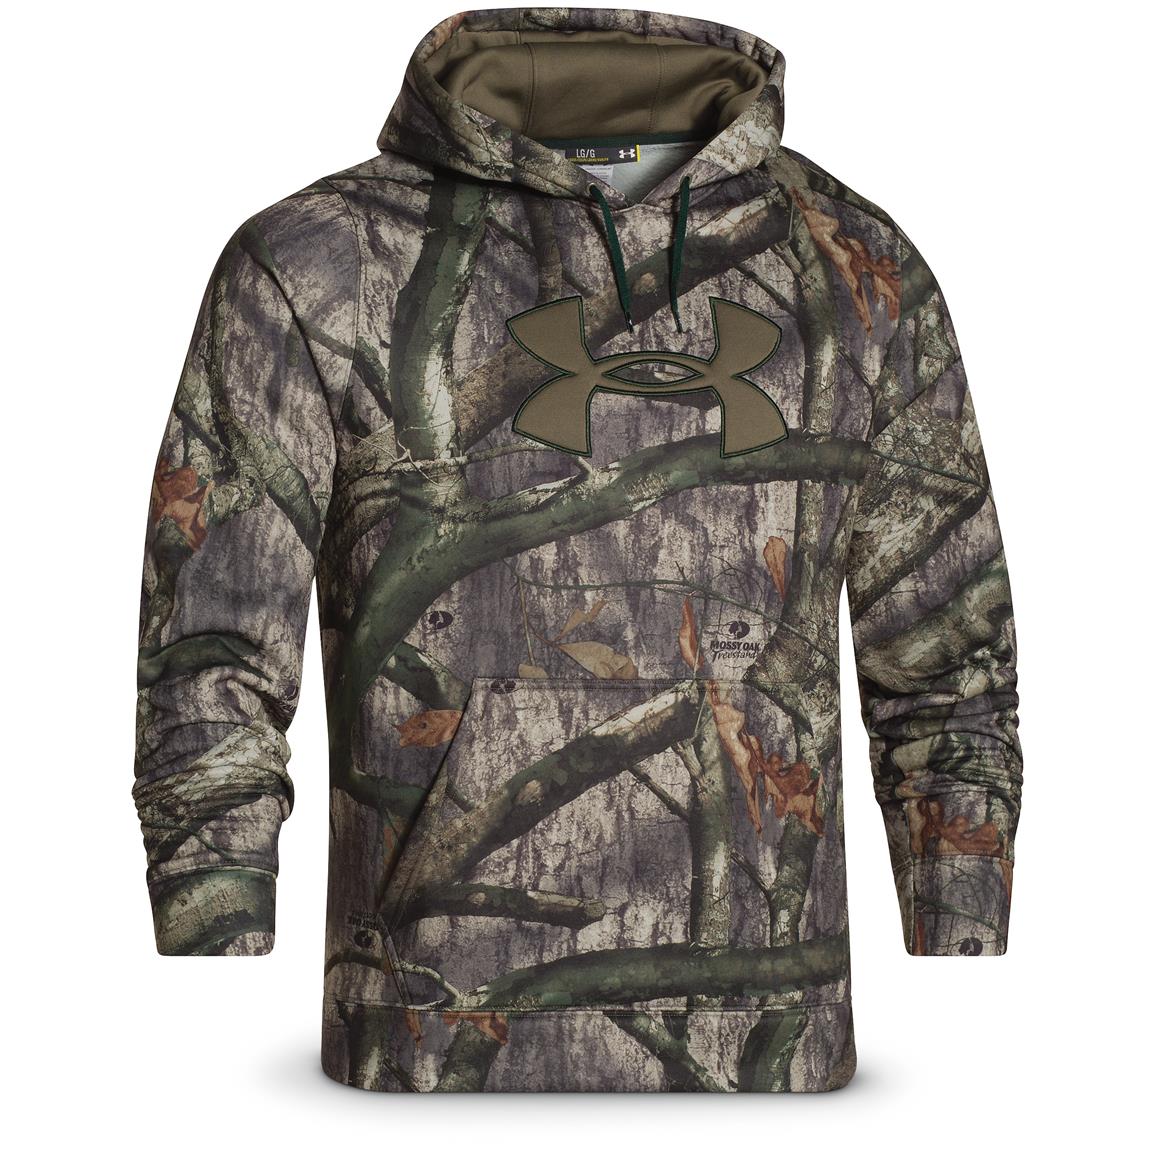 Under Armour Camo Big Logo Hoodie - 635821, Lifestyle at Sportsman's Guide